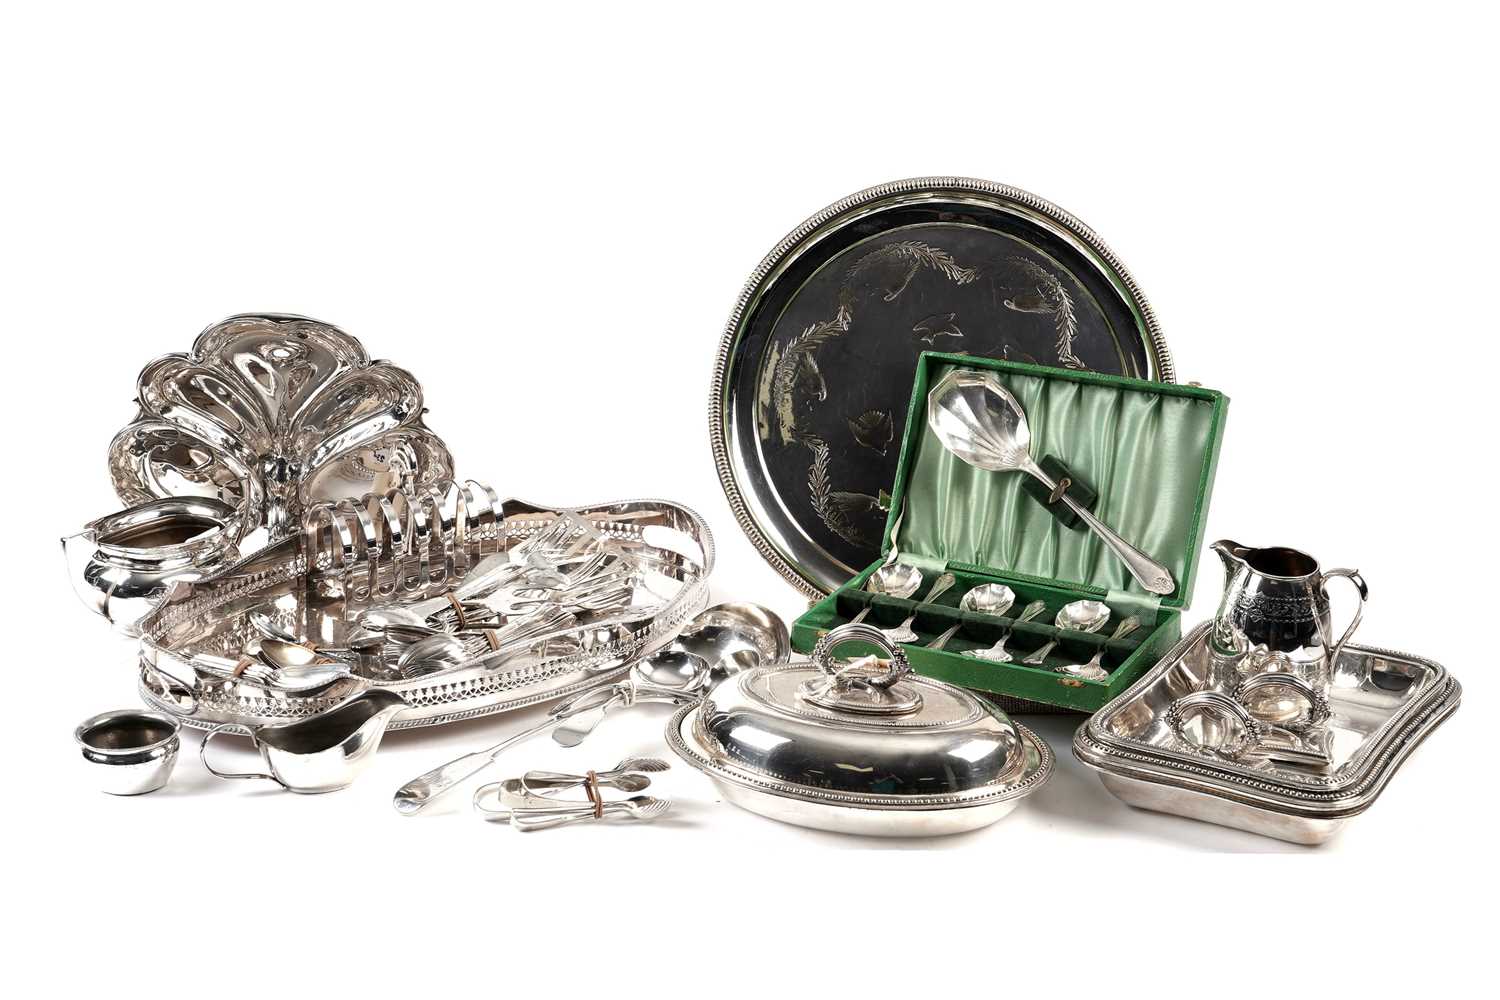 Assortment of silver-plated items